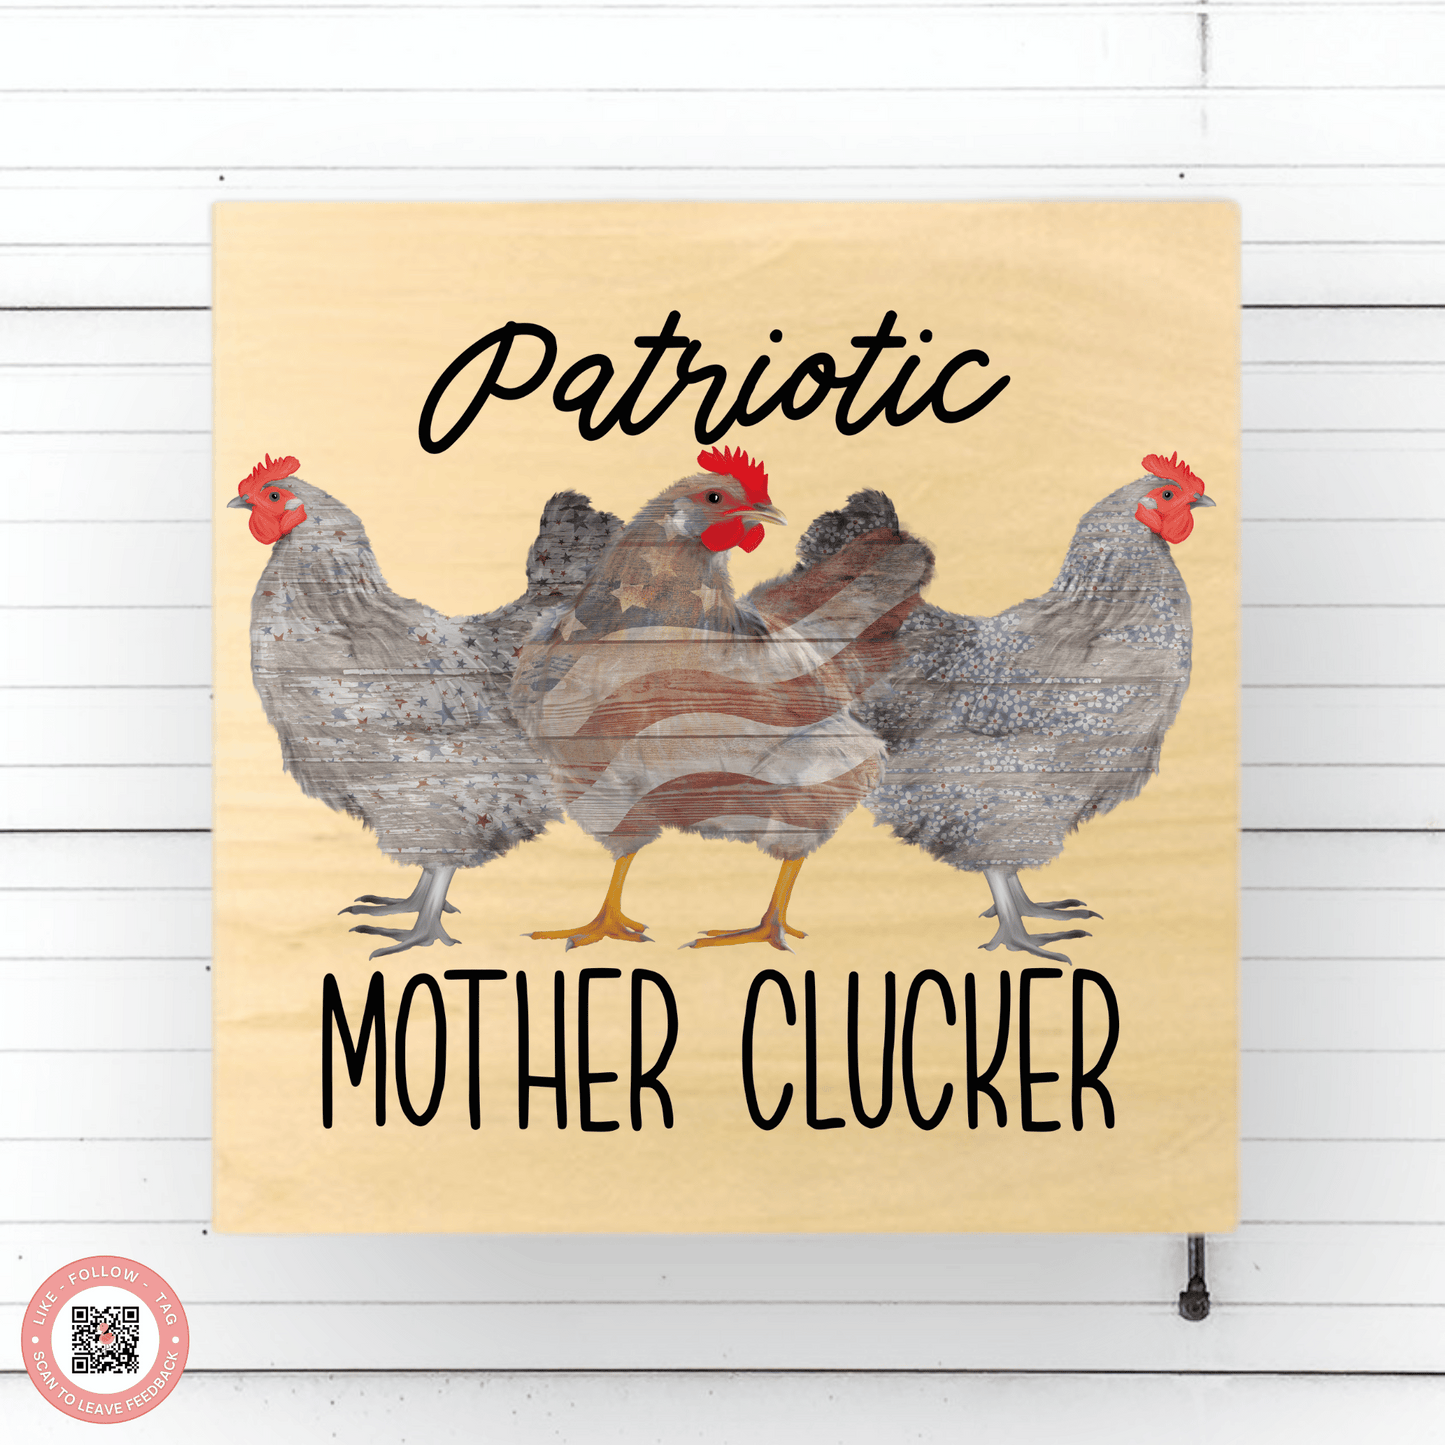 Handmade Patriotic Mother Clucker Wood Sign - Perfect for Any Home Decor